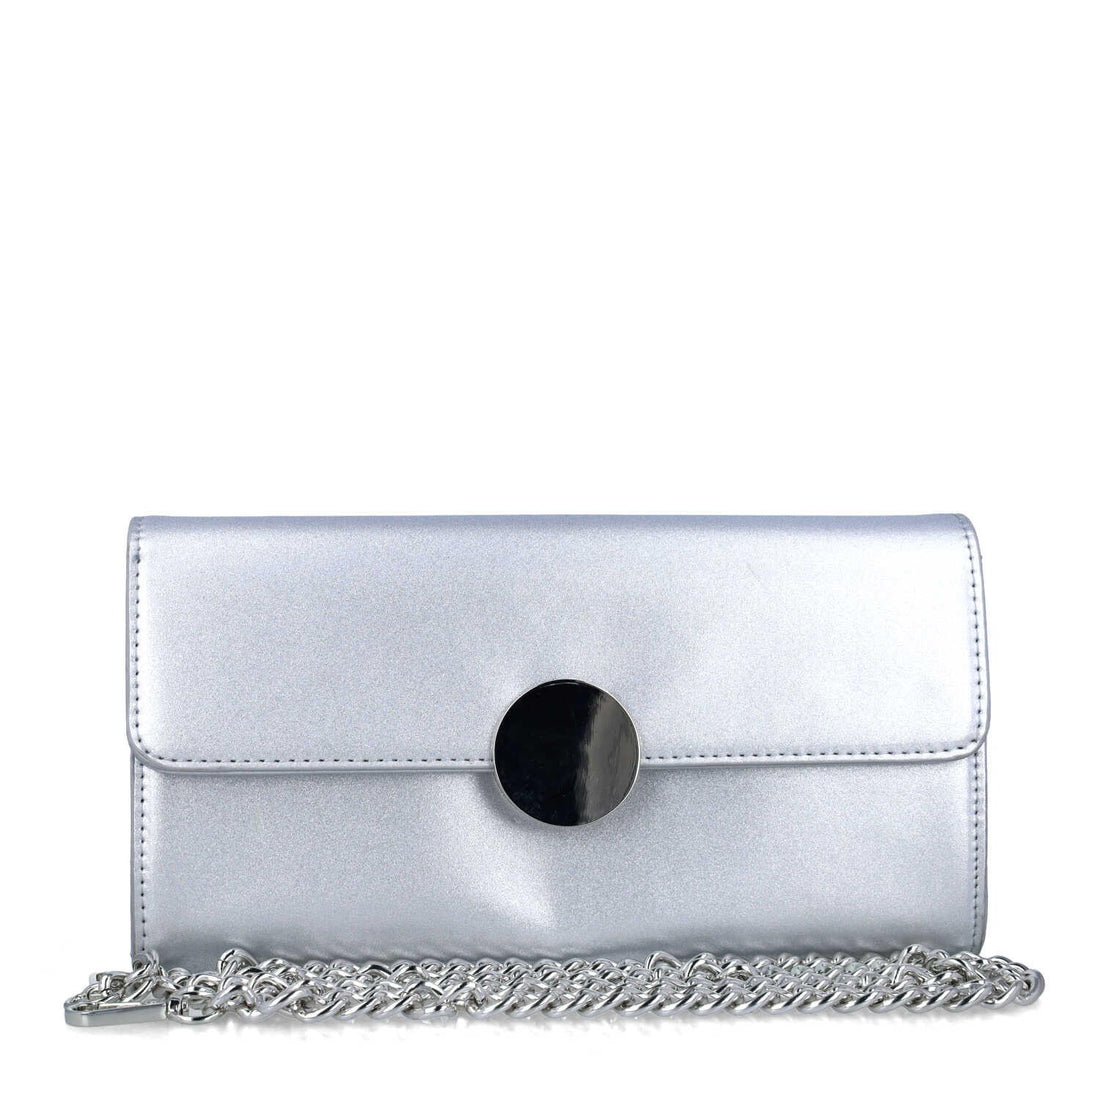 Silver Clutch Bag With Chain Strap_85712_09_01